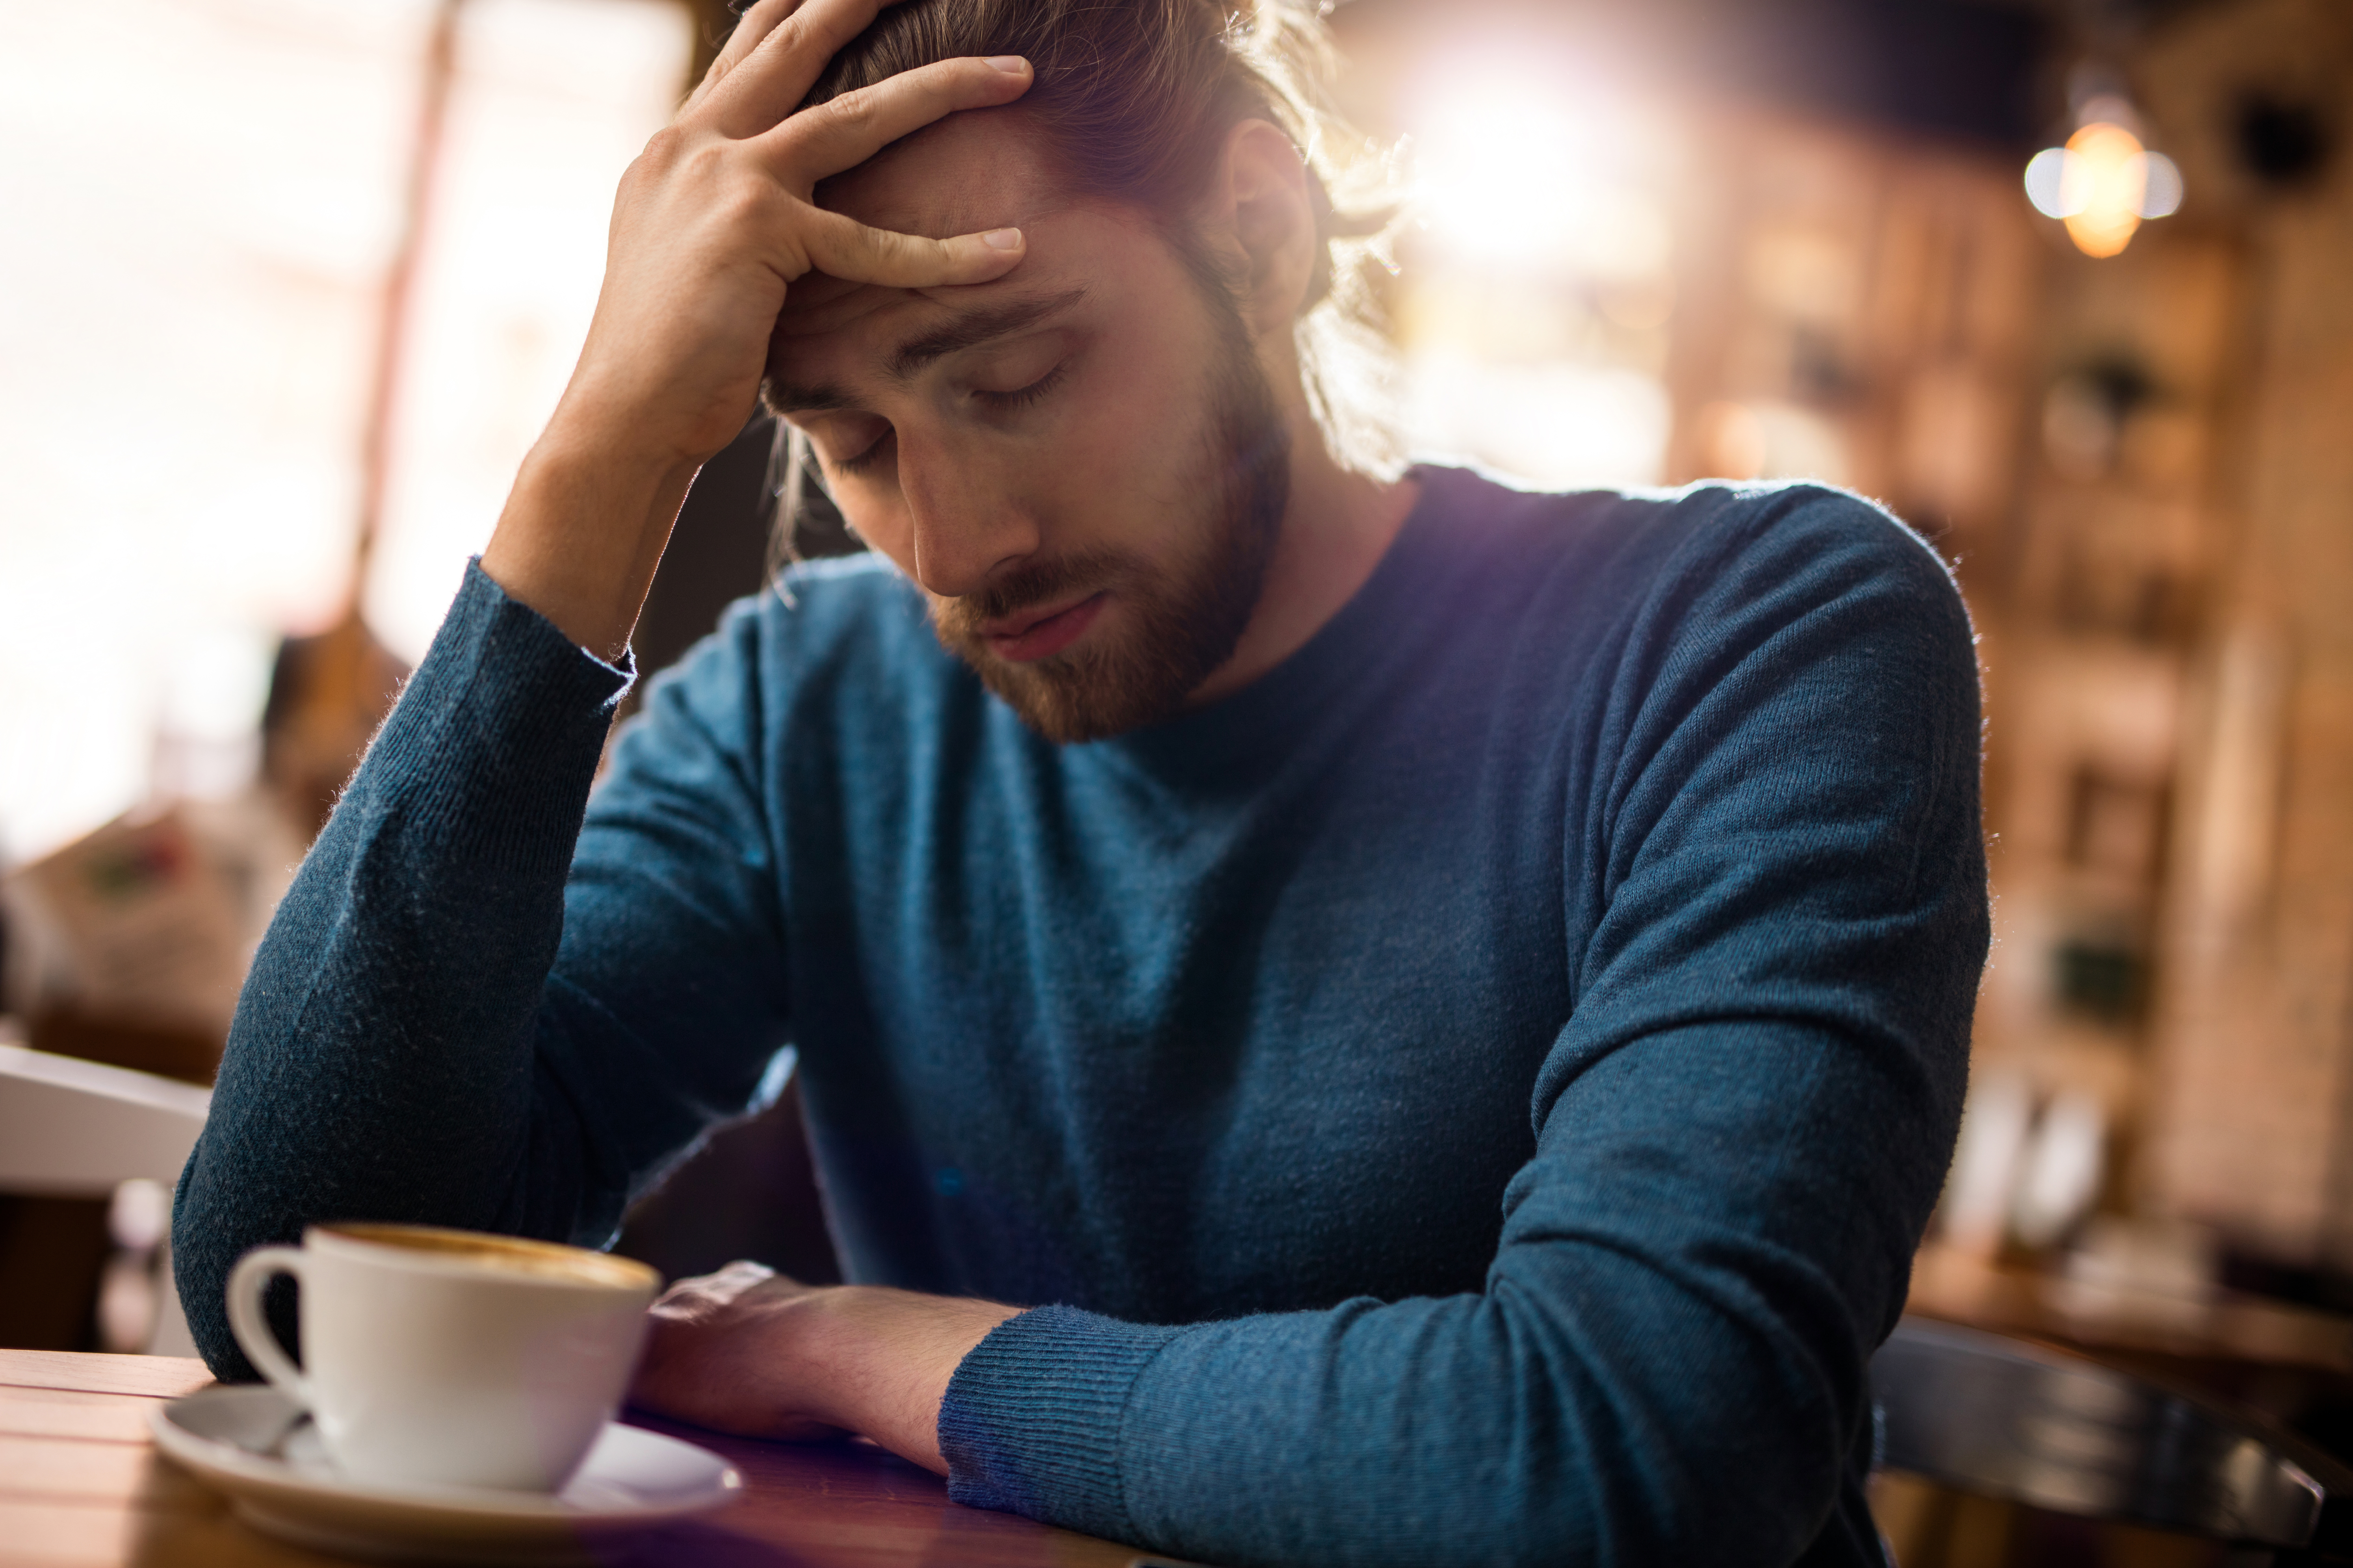 Stressed man holding his head in pain in a cafe | Source: Getty Images